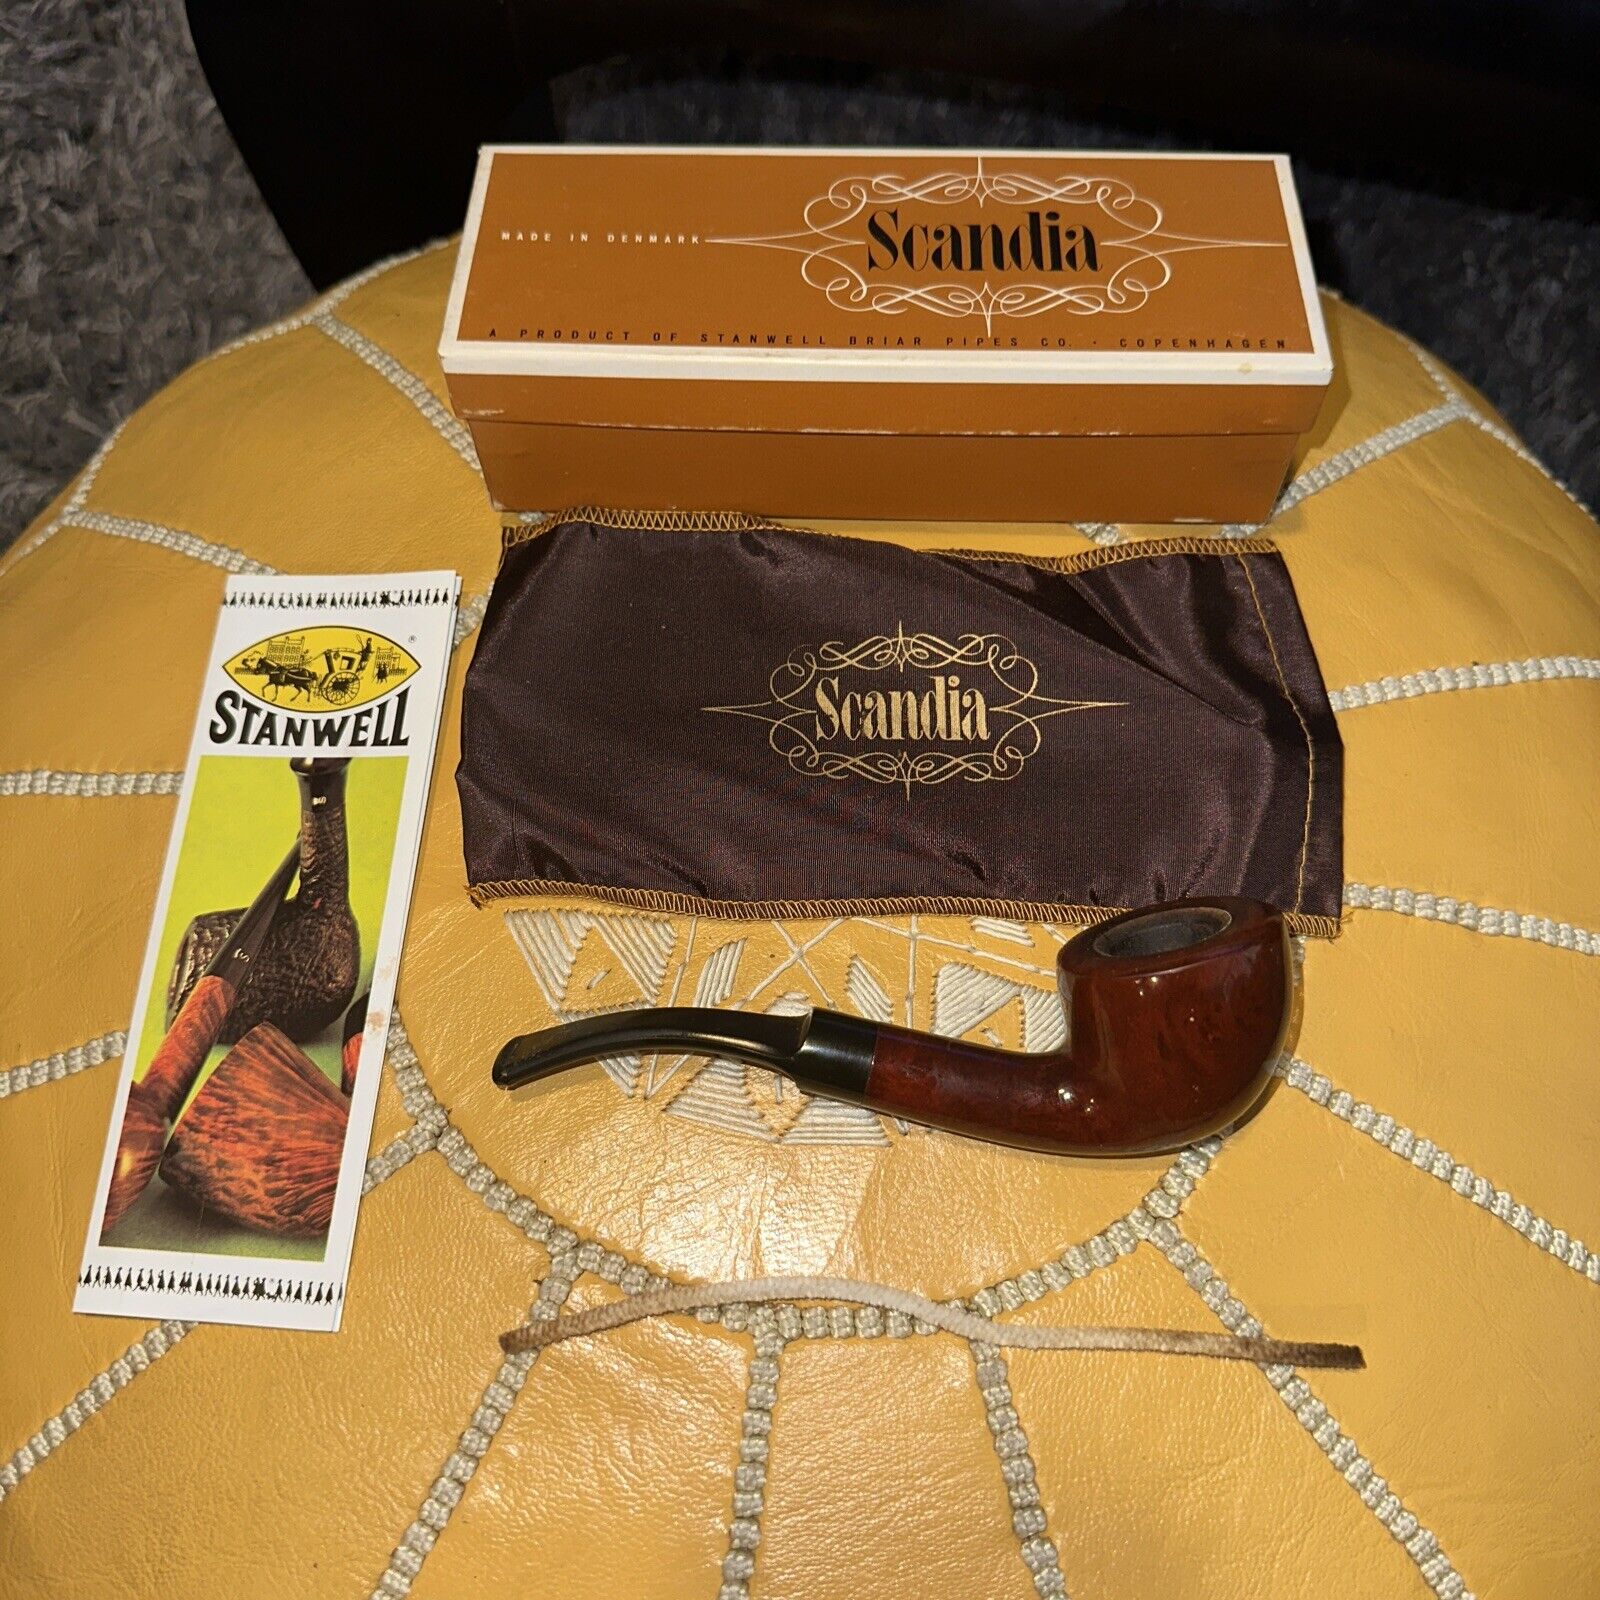 Vintage Scandia Stanwell Briar Pipes #770 Ole Smuggler Tobacco Pipe Denmark